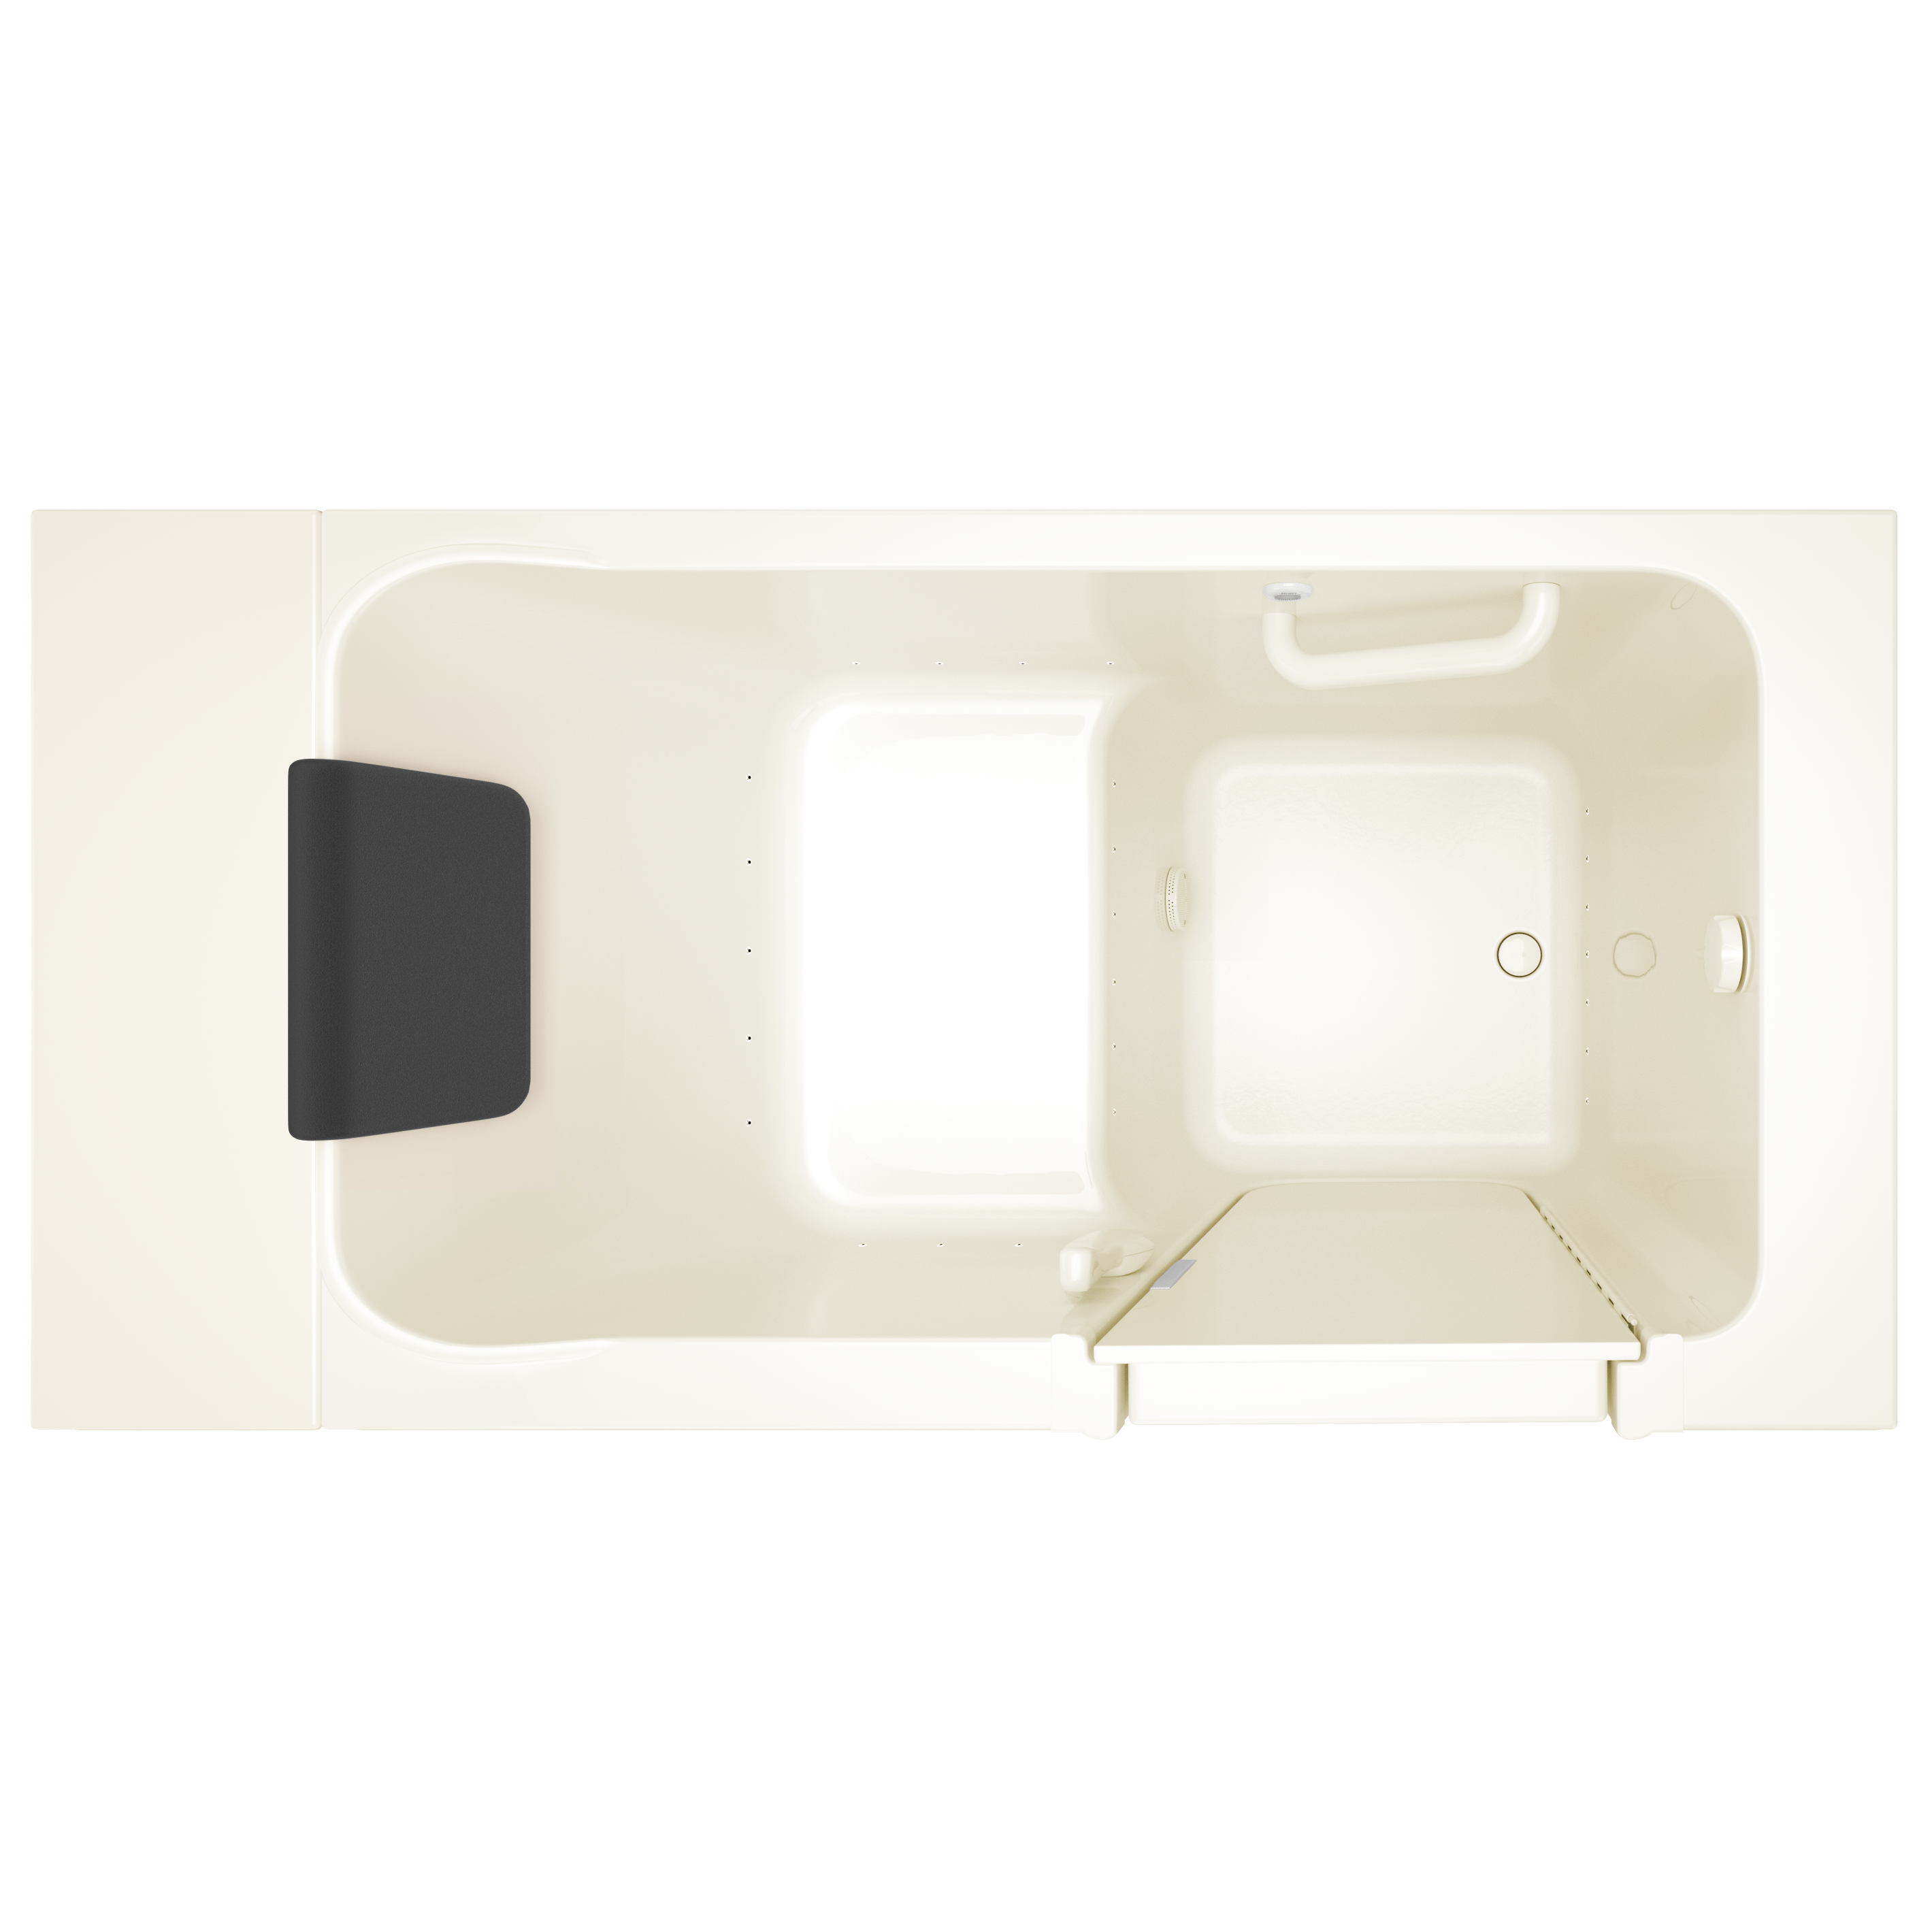 Acrylic Luxury Series 30 x 51 -Inch Walk-in Tub With Air Spa System - Right-Hand Drain